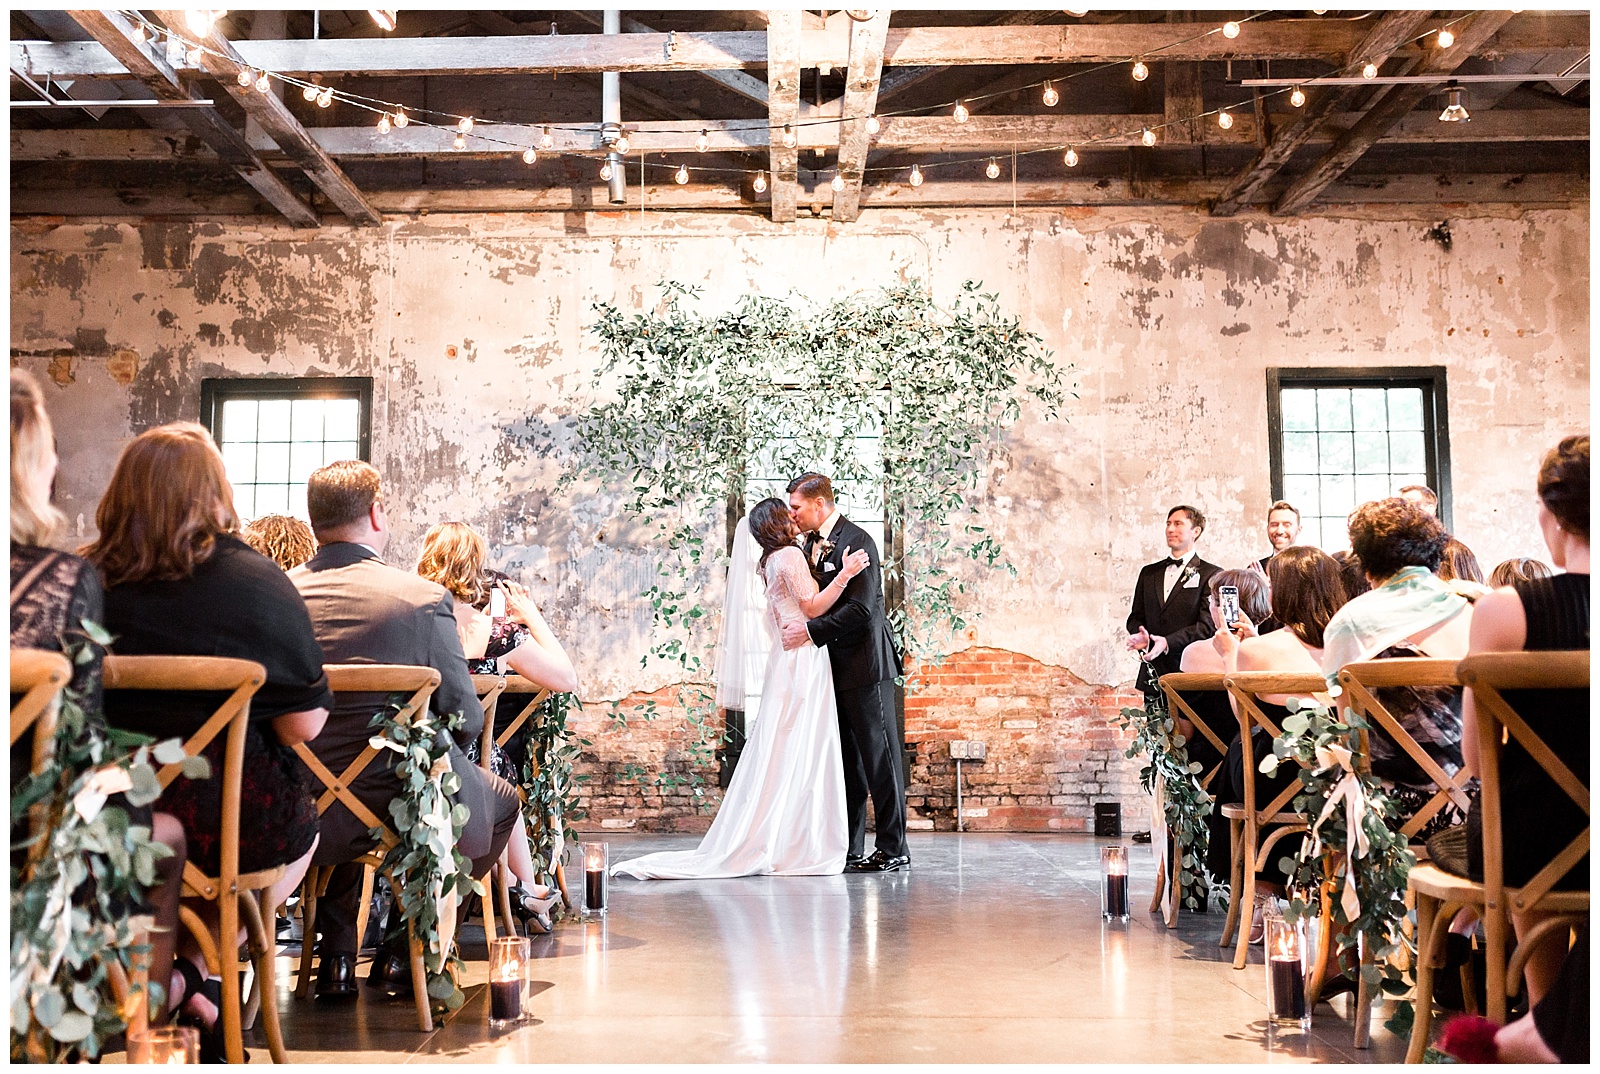 hannah mink photography, baltimore wedding photographer, baltimore, wedding, photographer, mount washington mill dye house, dye house, rustic, industrial, copper, blue, navy, neutral maryland, bouquet, flowers, ceremony, wedding details